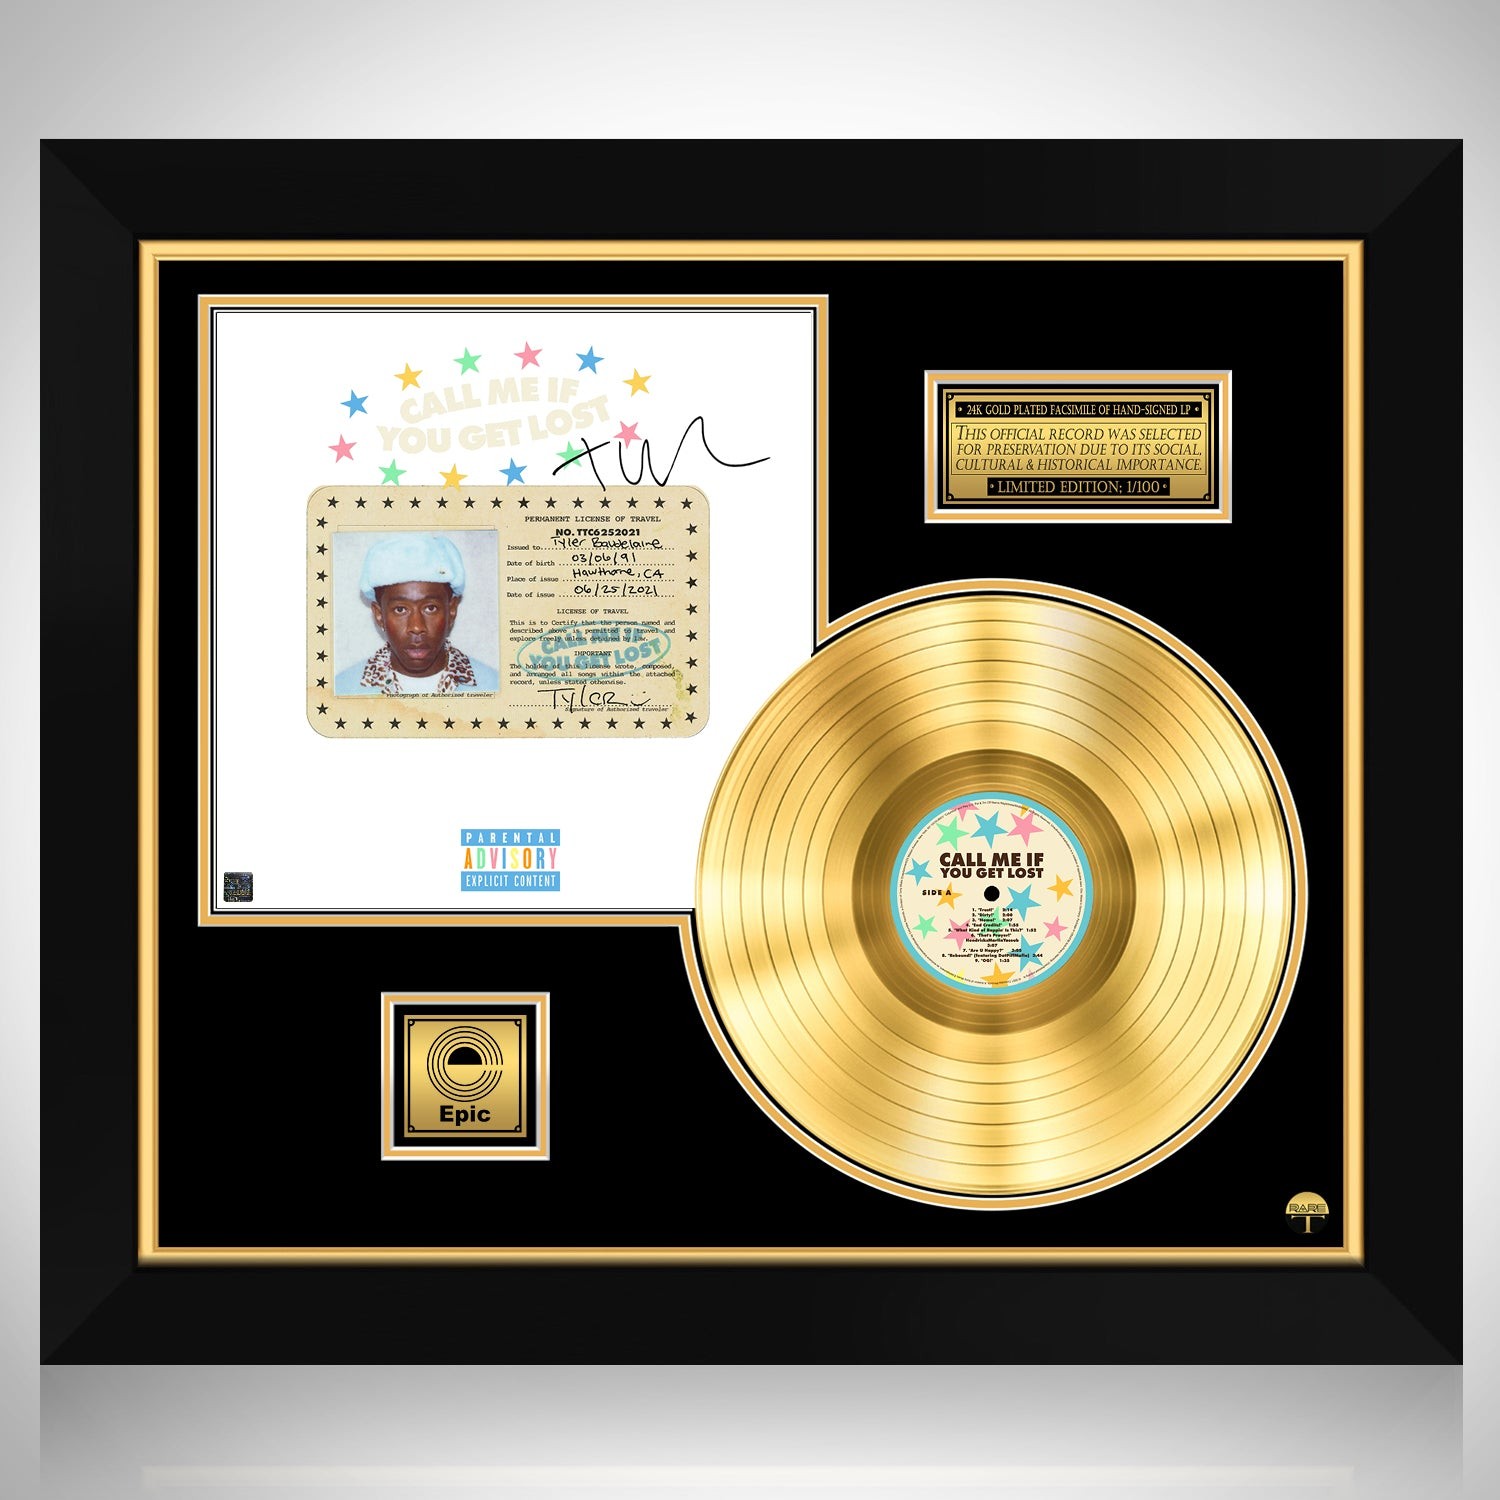 Tyler the Creator - Call me if you get lost Gold LP Limited Signature  Edition Custom Frame